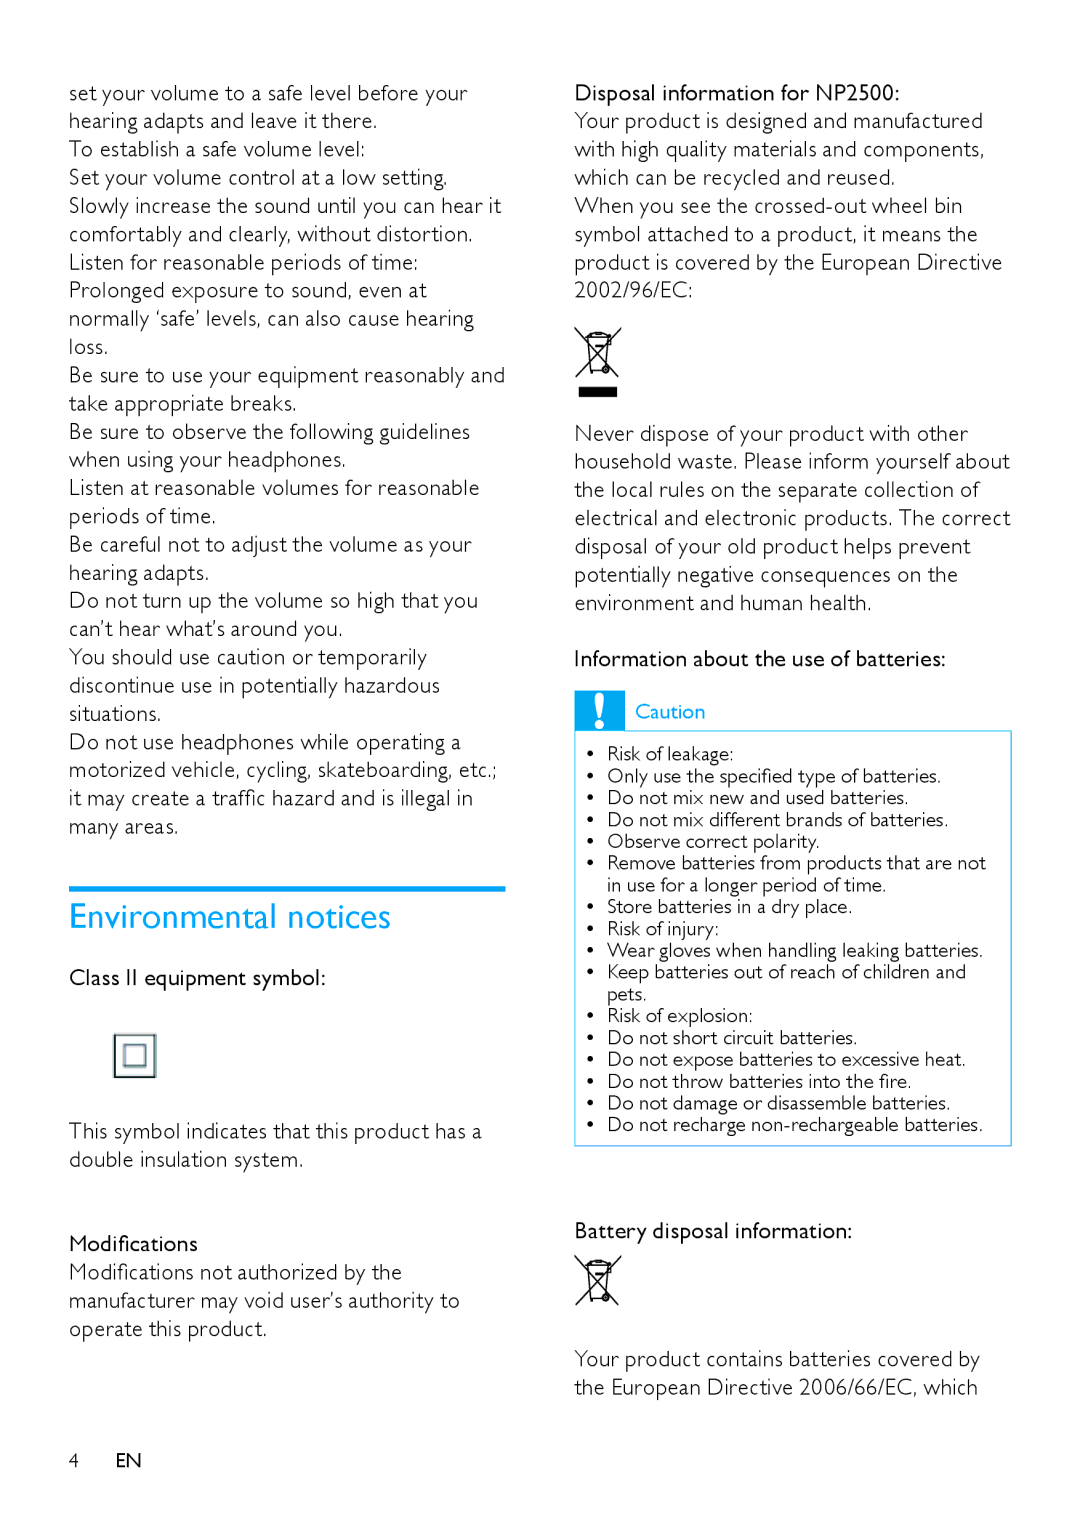 Philips HK-0947-NP2500-FR Environmental notices, Information about the use of batteries, Battery disposal information 